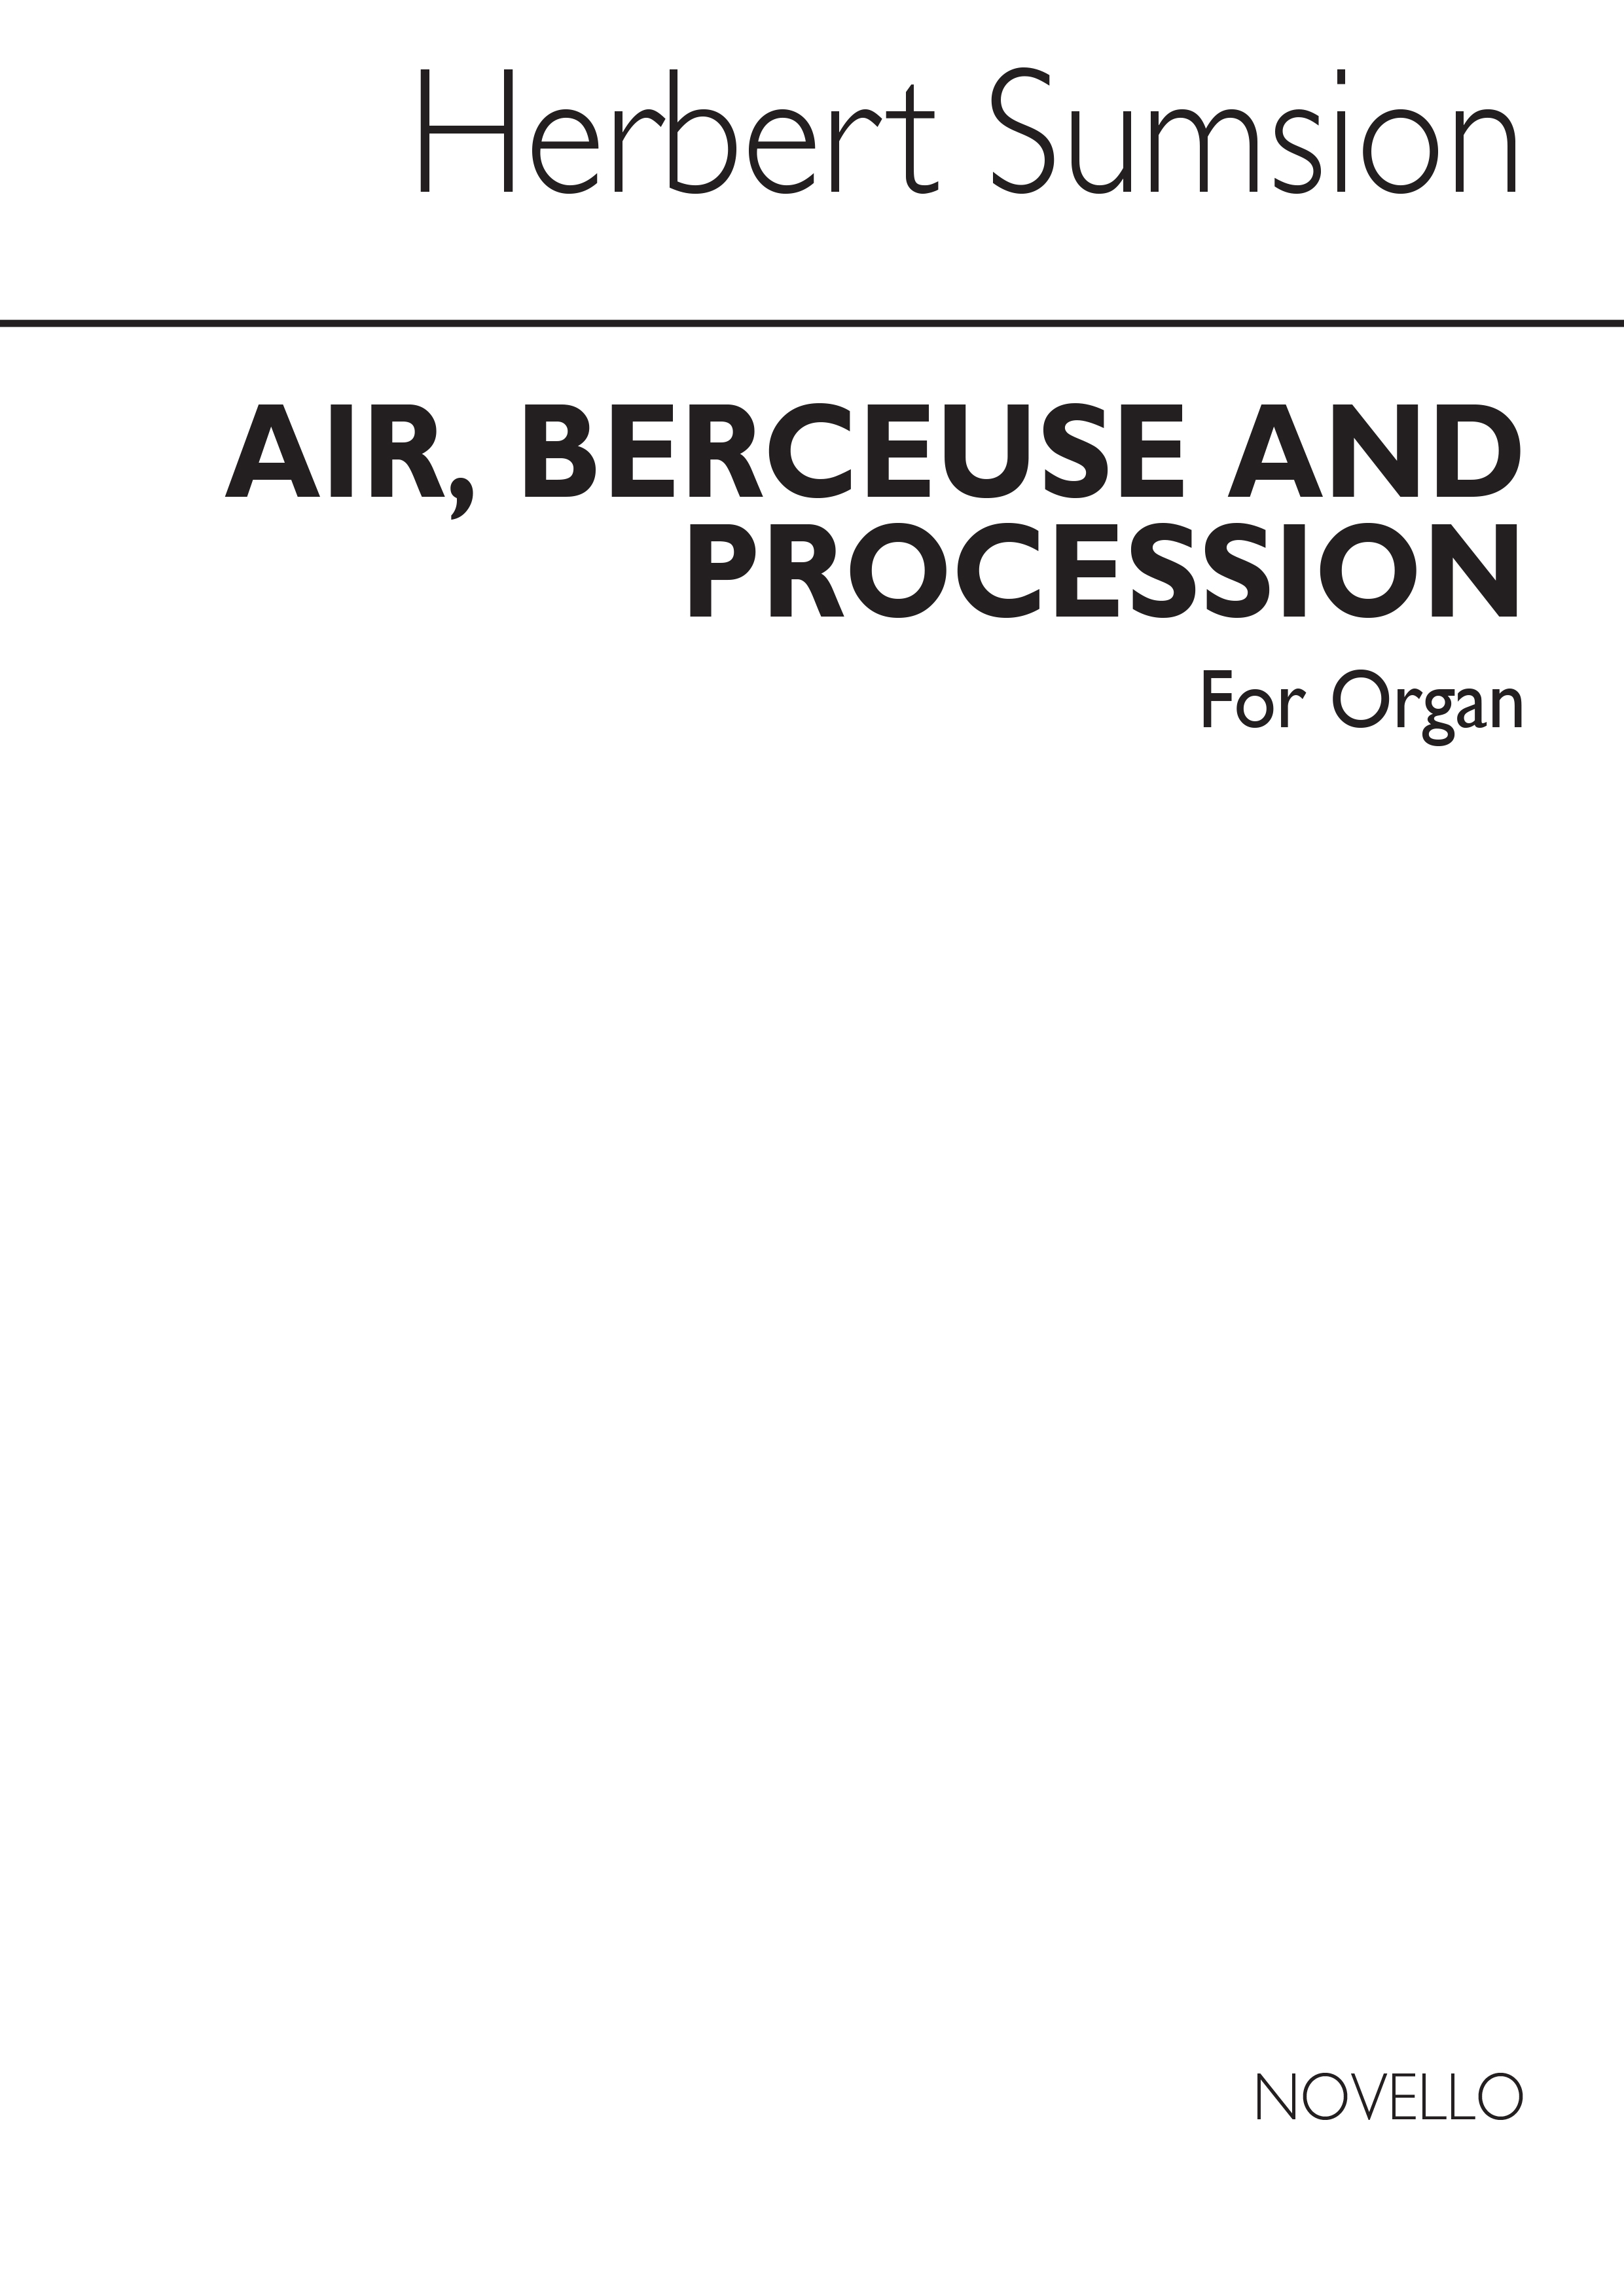 Herbert Sumsion: Air, Berceuse And Procession for Organ